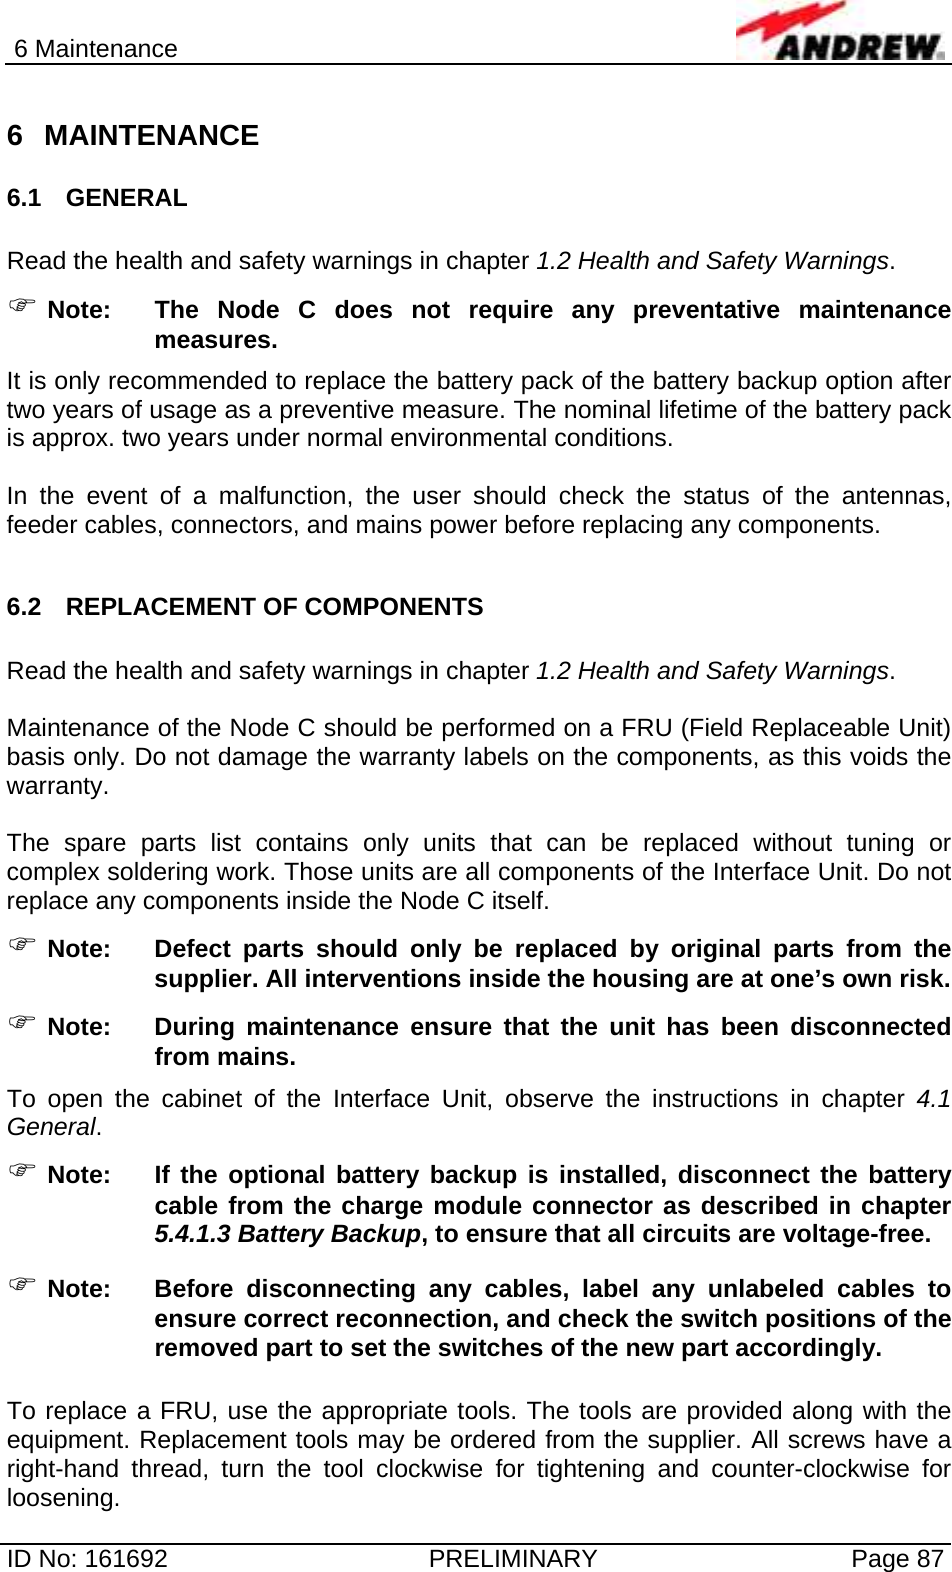 6 Maintenance  ID No: 161692  PRELIMINARY  Page 87 6 MAINTENANCE  6.1 GENERAL  Read the health and safety warnings in chapter 1.2 Health and Safety Warnings. ) Note:  The Node C does not require any preventative maintenance measures. It is only recommended to replace the battery pack of the battery backup option after two years of usage as a preventive measure. The nominal lifetime of the battery pack is approx. two years under normal environmental conditions.  In the event of a malfunction, the user should check the status of the antennas, feeder cables, connectors, and mains power before replacing any components.  6.2 REPLACEMENT OF COMPONENTS  Read the health and safety warnings in chapter 1.2 Health and Safety Warnings.  Maintenance of the Node C should be performed on a FRU (Field Replaceable Unit) basis only. Do not damage the warranty labels on the components, as this voids the warranty.   The spare parts list contains only units that can be replaced without tuning or complex soldering work. Those units are all components of the Interface Unit. Do not replace any components inside the Node C itself. ) Note:  Defect parts should only be replaced by original parts from the supplier. All interventions inside the housing are at one’s own risk. ) Note:  During maintenance ensure that the unit has been disconnected from mains. To open the cabinet of the Interface Unit, observe the instructions in chapter 4.1 General. ) Note:  If the optional battery backup is installed, disconnect the battery cable from the charge module connector as described in chapter 5.4.1.3 Battery Backup, to ensure that all circuits are voltage-free. ) Note:  Before disconnecting any cables, label any unlabeled cables to ensure correct reconnection, and check the switch positions of the removed part to set the switches of the new part accordingly.  To replace a FRU, use the appropriate tools. The tools are provided along with the equipment. Replacement tools may be ordered from the supplier. All screws have a right-hand thread, turn the tool clockwise for tightening and counter-clockwise for loosening.  